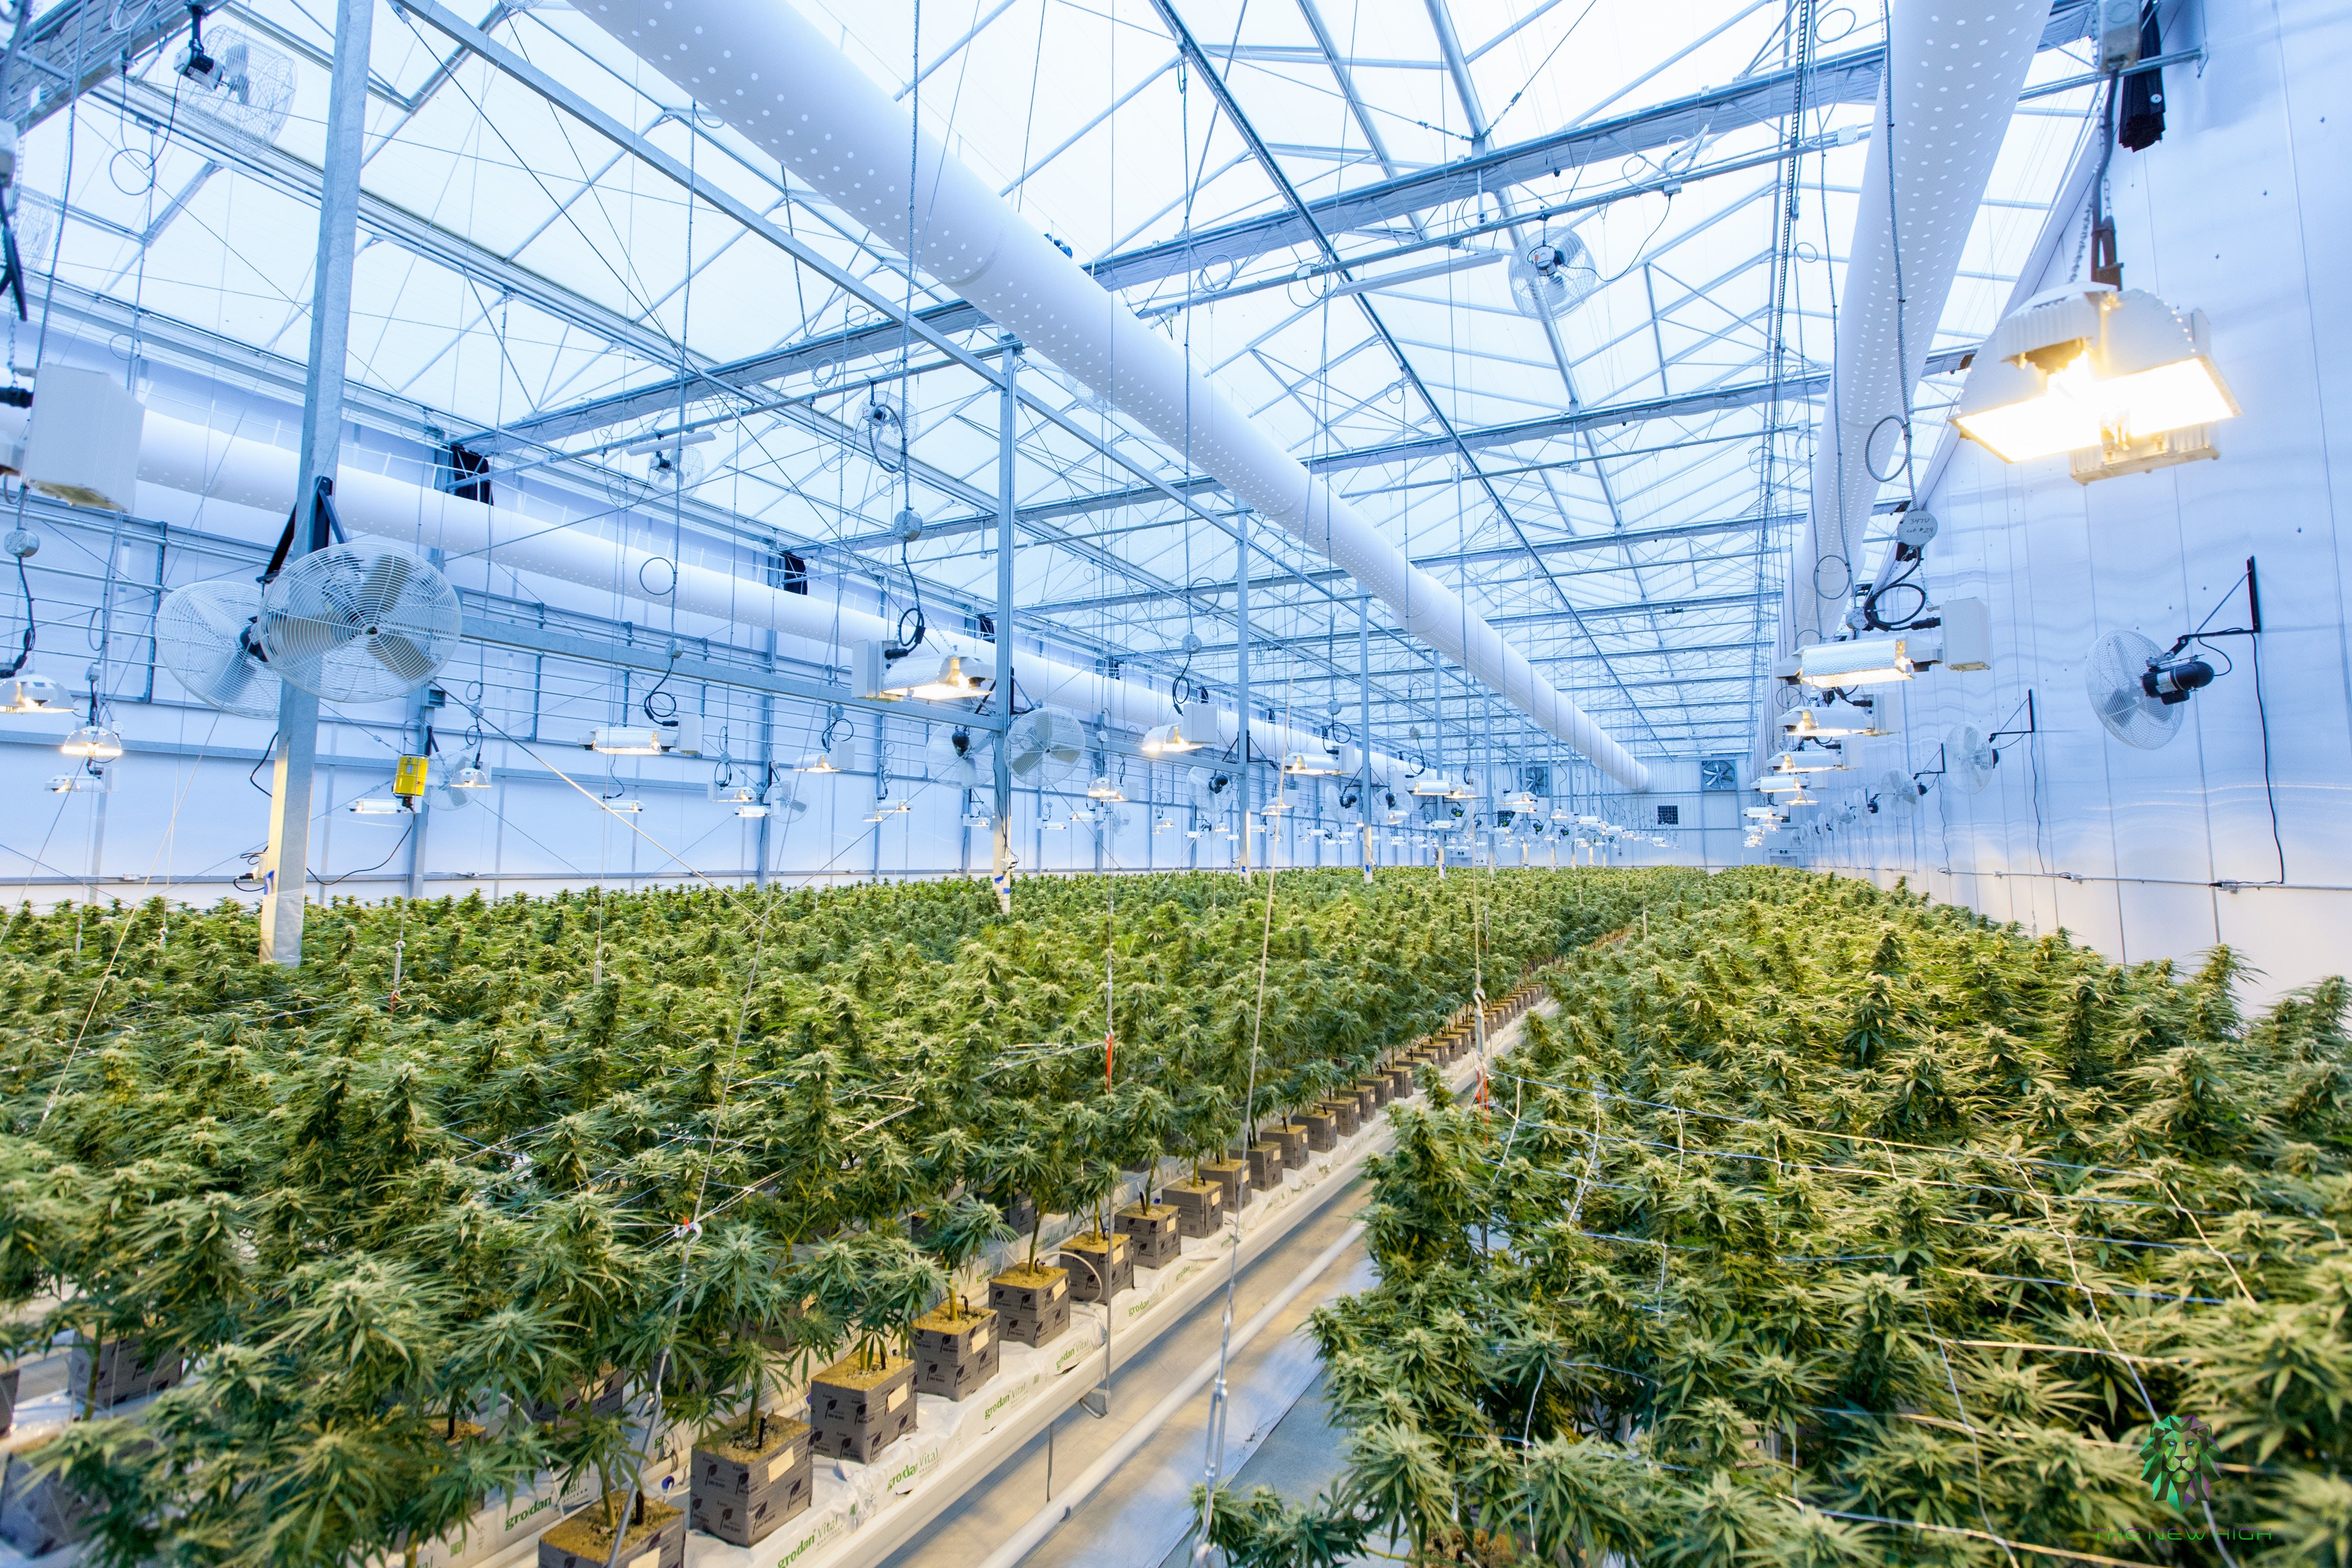 Sundial Growers (SNDL) Stock Fell To 13 Cents During COVID Pandemic — How Much Is A $1,000 Investment At The Low Worth Now?